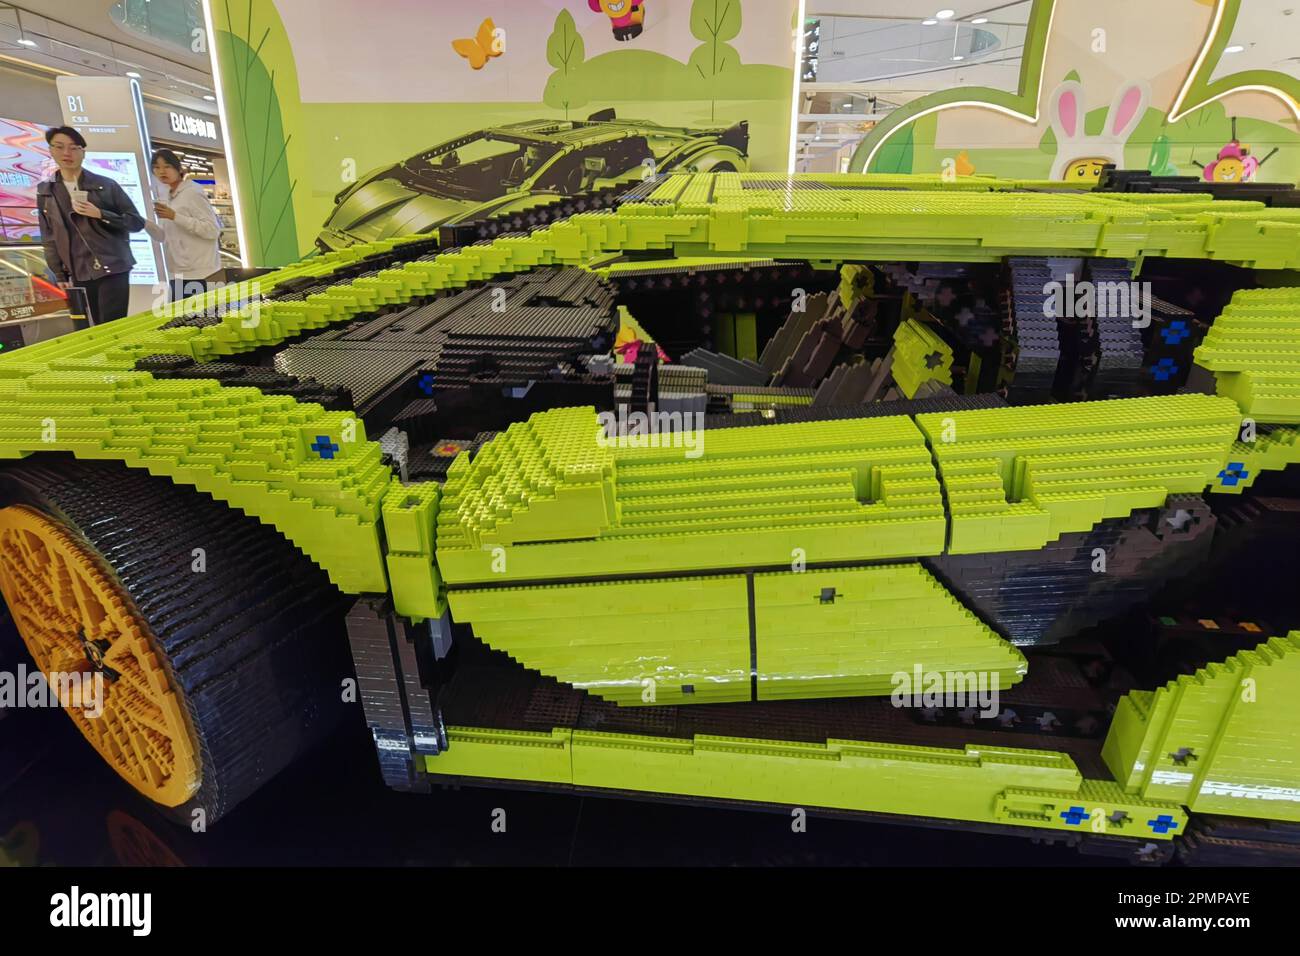 Taiyuan City, north China's Shanxi Province, 13 April, 2023. A "Lamborghini" made up of hundreds of thousands of Lego blocks is displayed in a shopping mall in Taiyuan City, north China's Shanxi Province, 13 April, 2023. (Photo by ChinaImages/Sipa USA) Credit: Sipa US/Alamy Live News Stock Photo